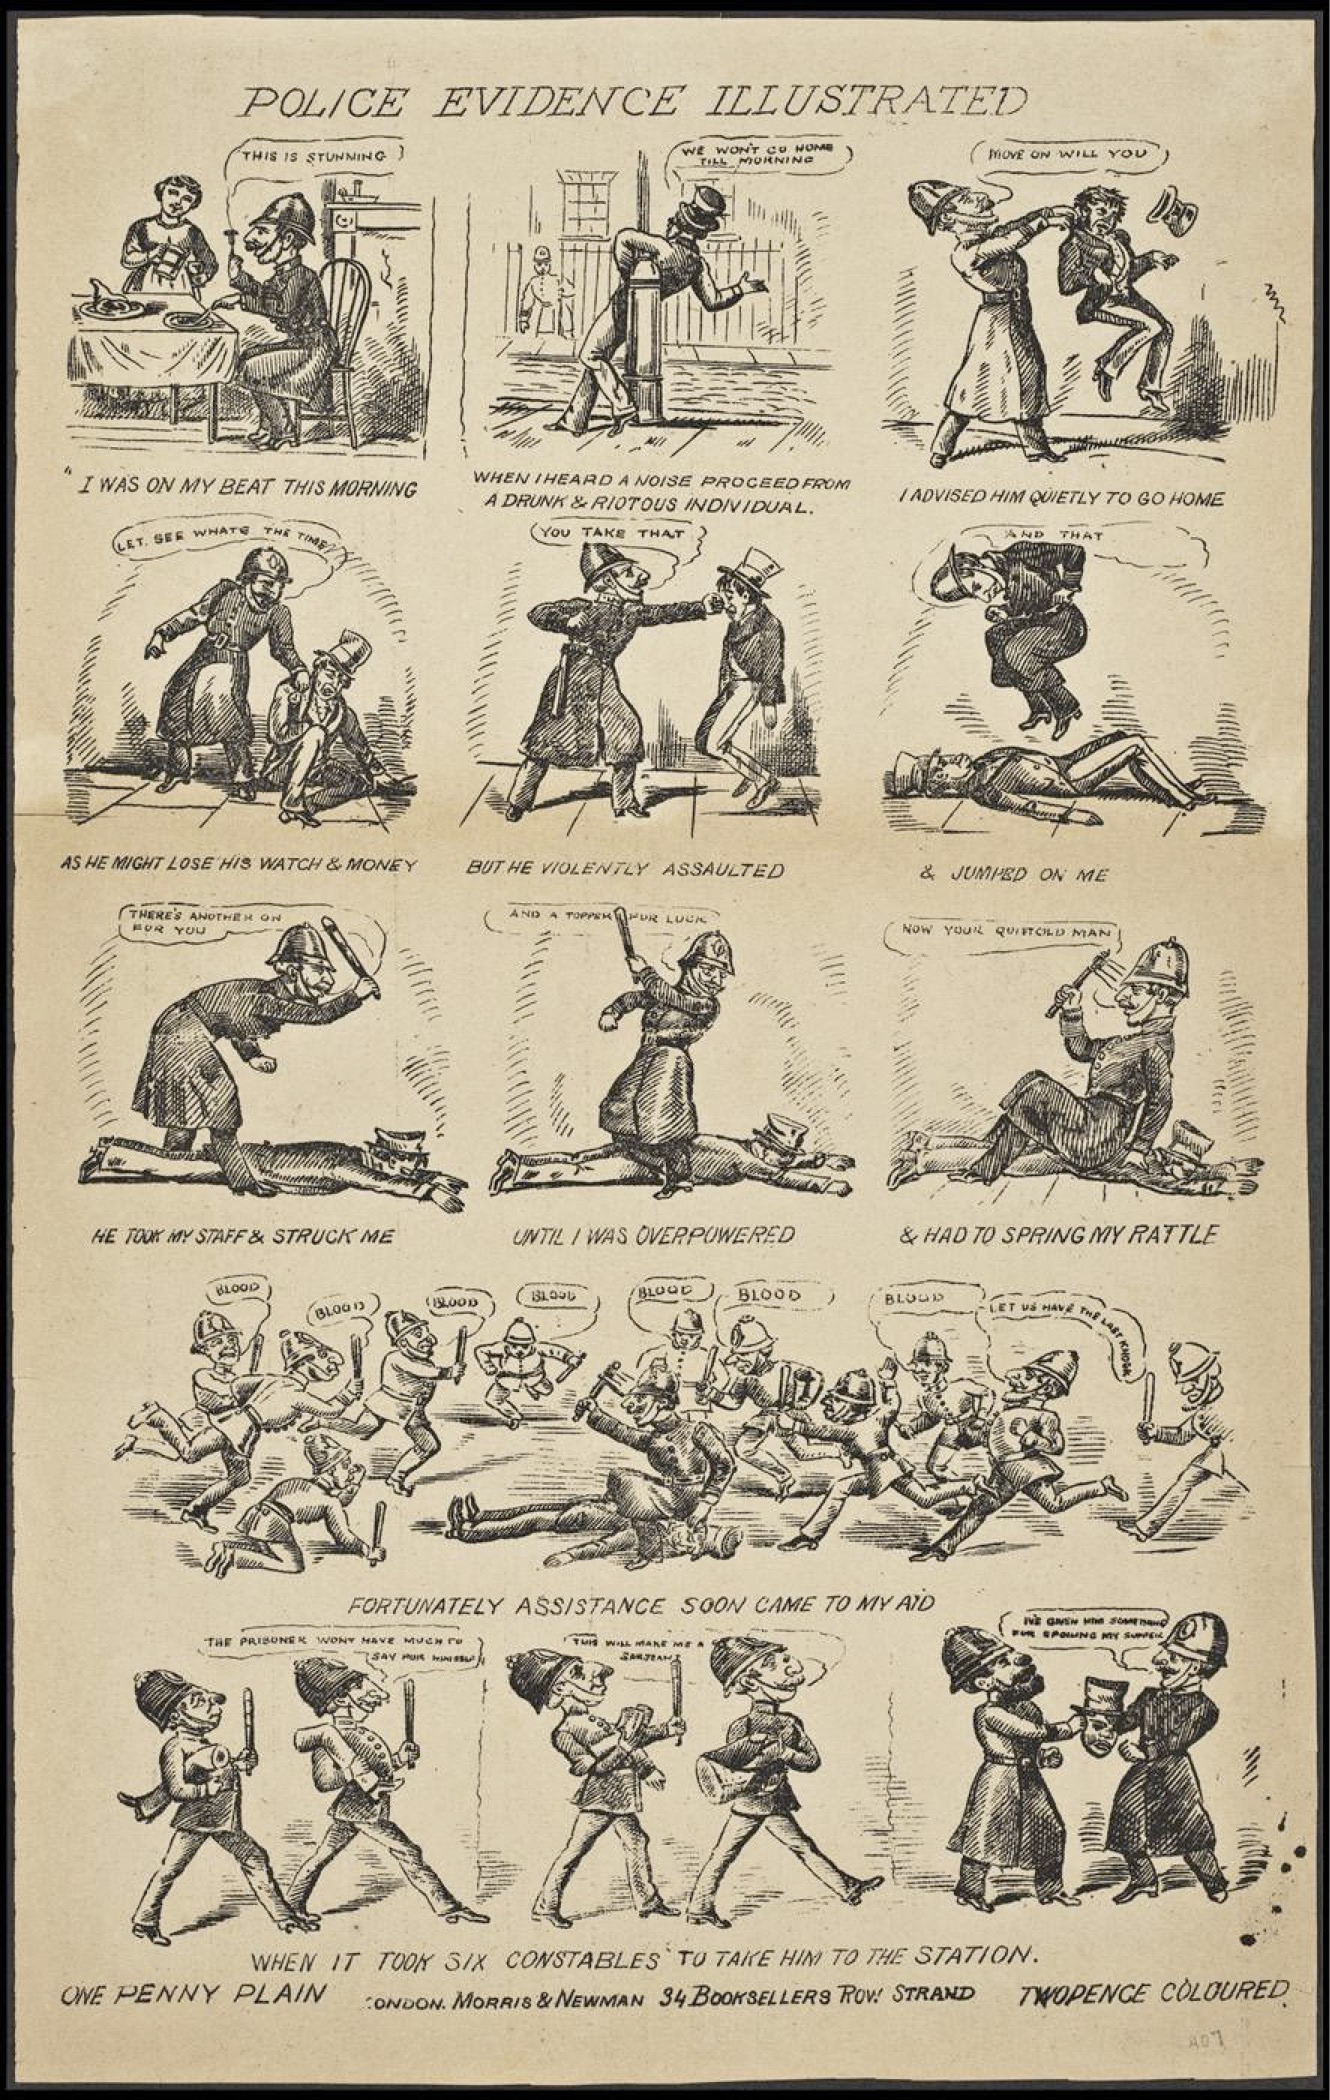 Fig. 1. Original cartoon, “Police Evidence Illustrated.” Courtesy Lilly Library, Indiana University, Bloomington, Indiana.This black-and-white image depicts a series of 13 black-and-white vignettes in which a group of policemen attacks a “drunk and riotous individual.”